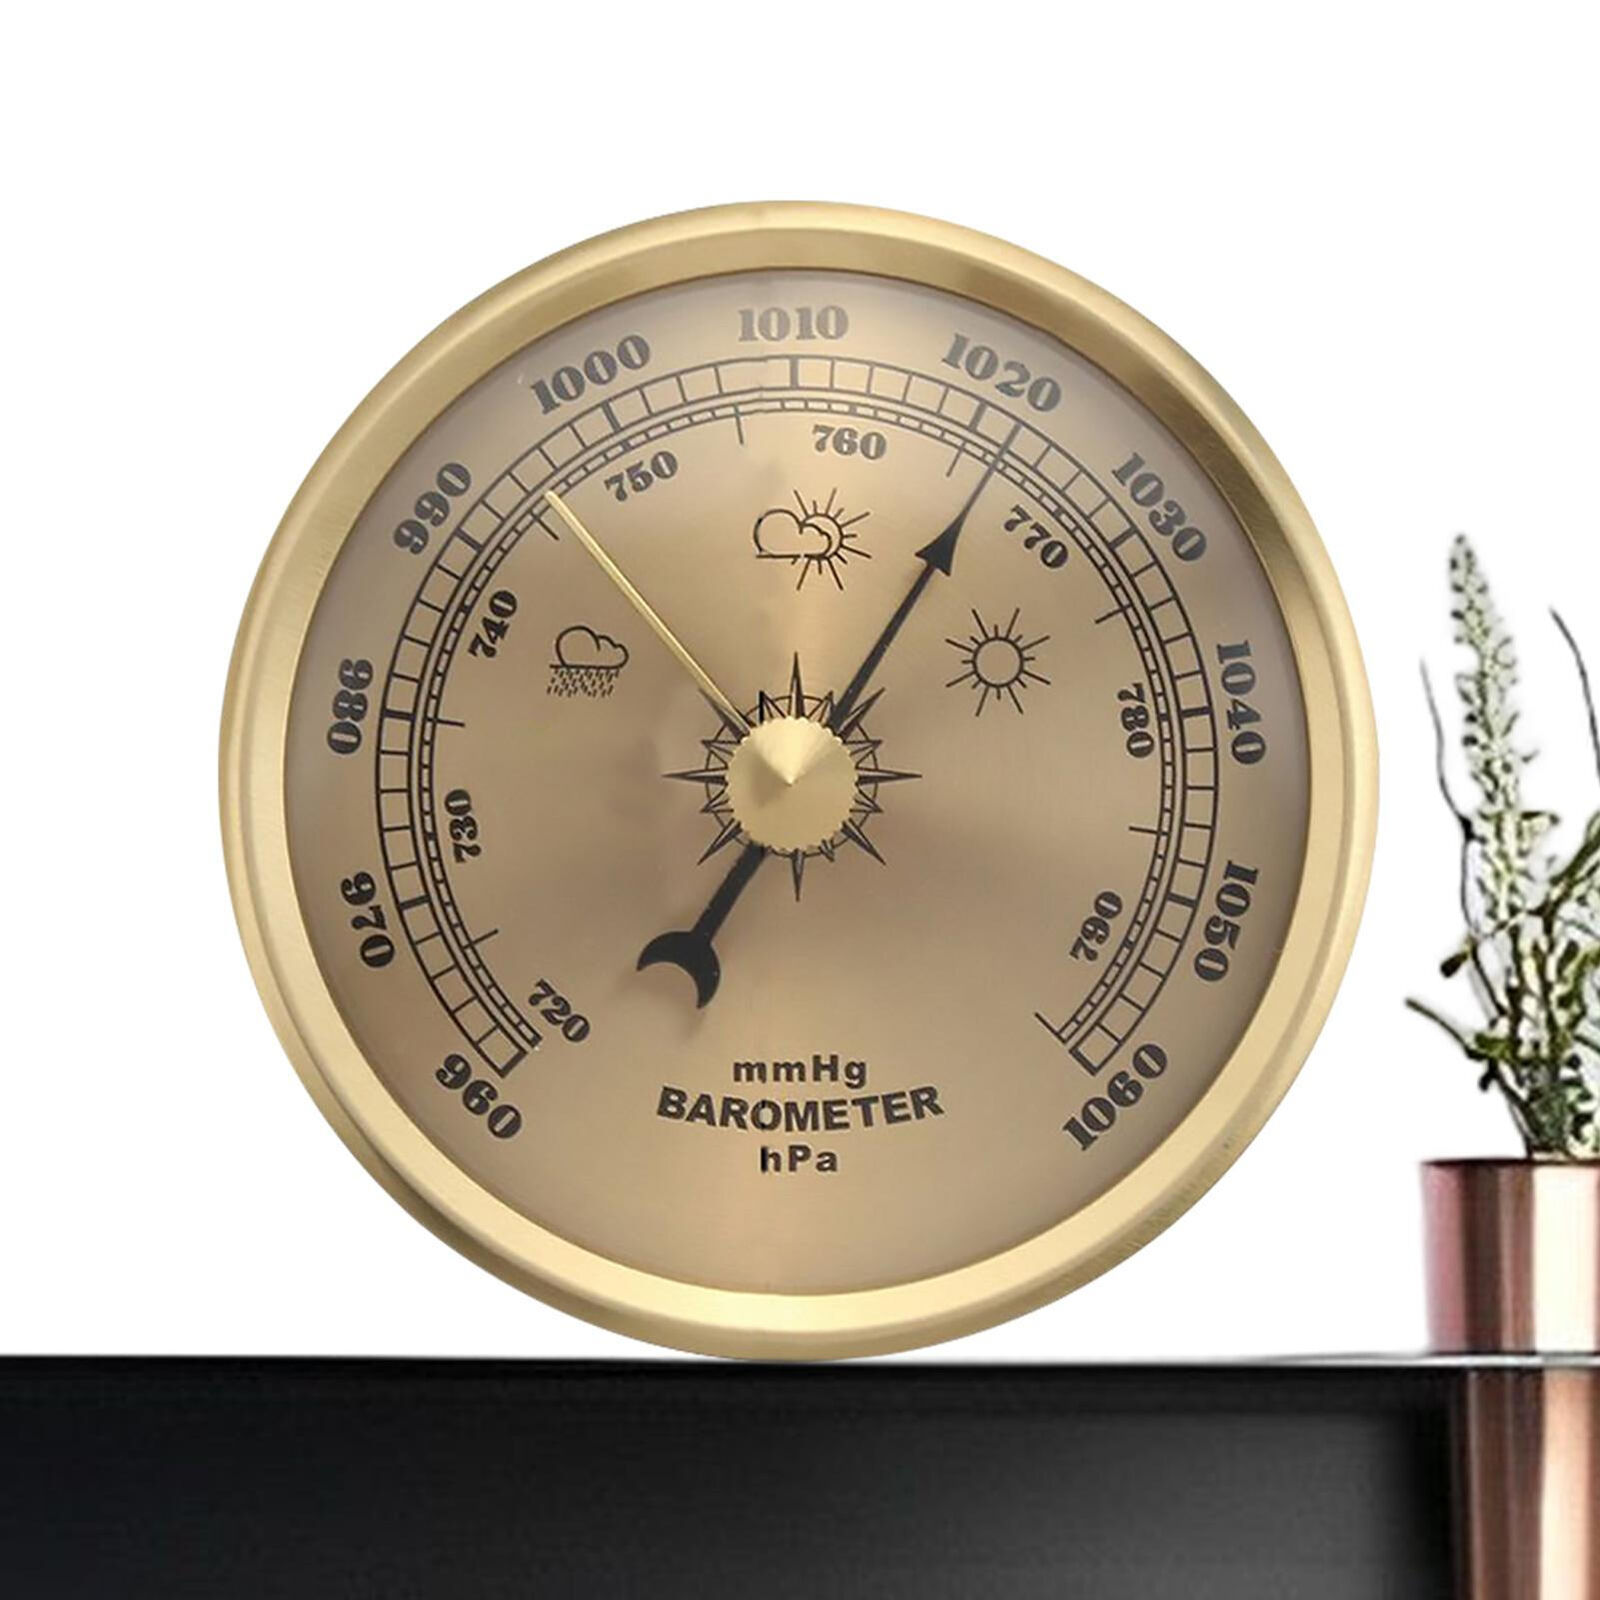 70 Mm Thermometer Barometer 3-in-1 Barometer With Integrated Hygrometer New